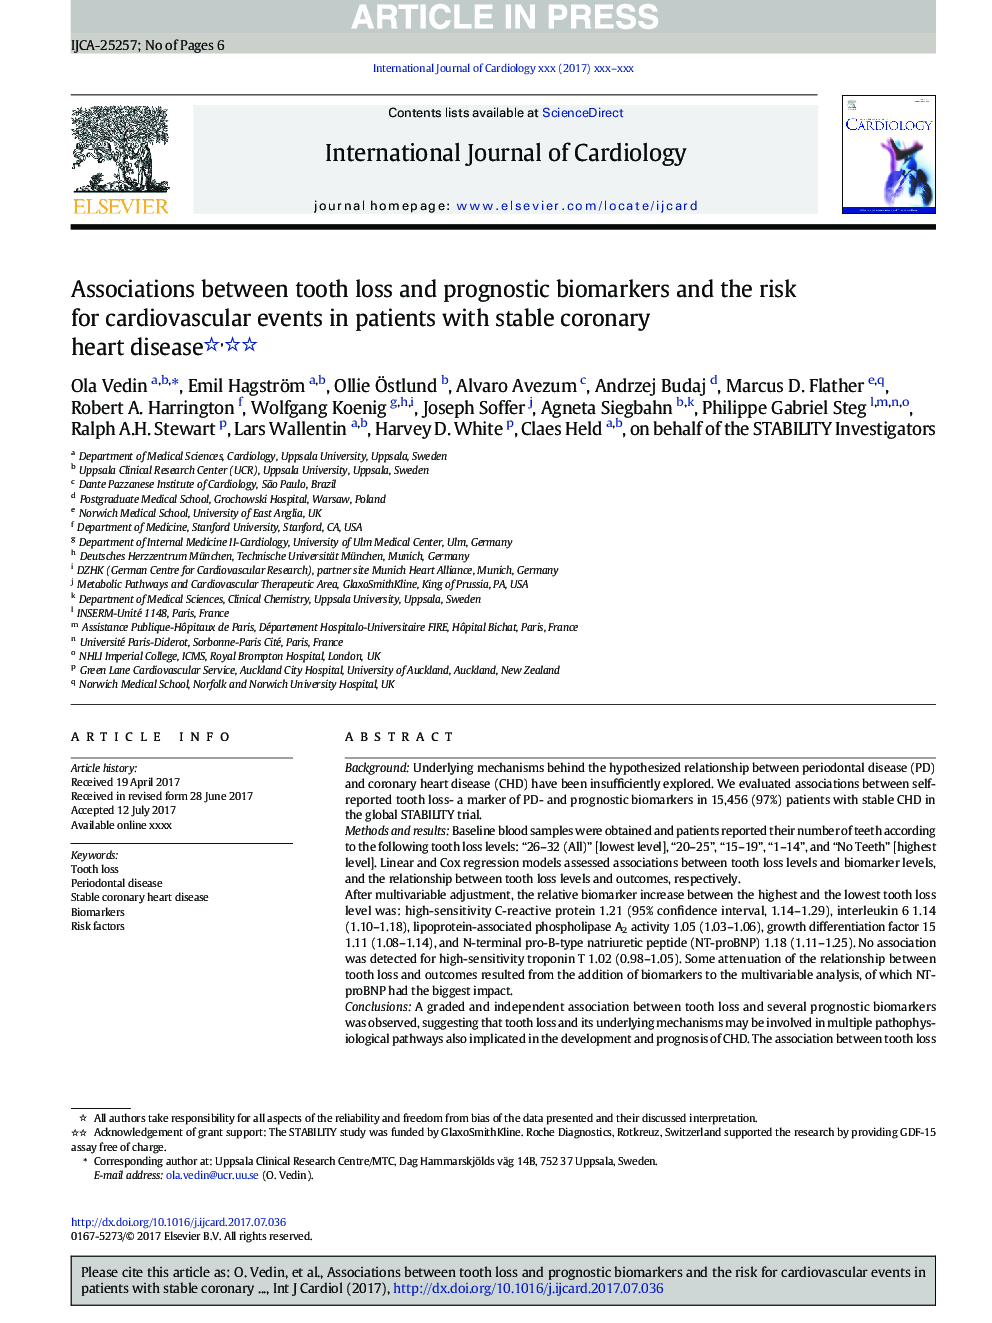 Associations between tooth loss and prognostic biomarkers and the risk for cardiovascular events in patients with stable coronary heart disease